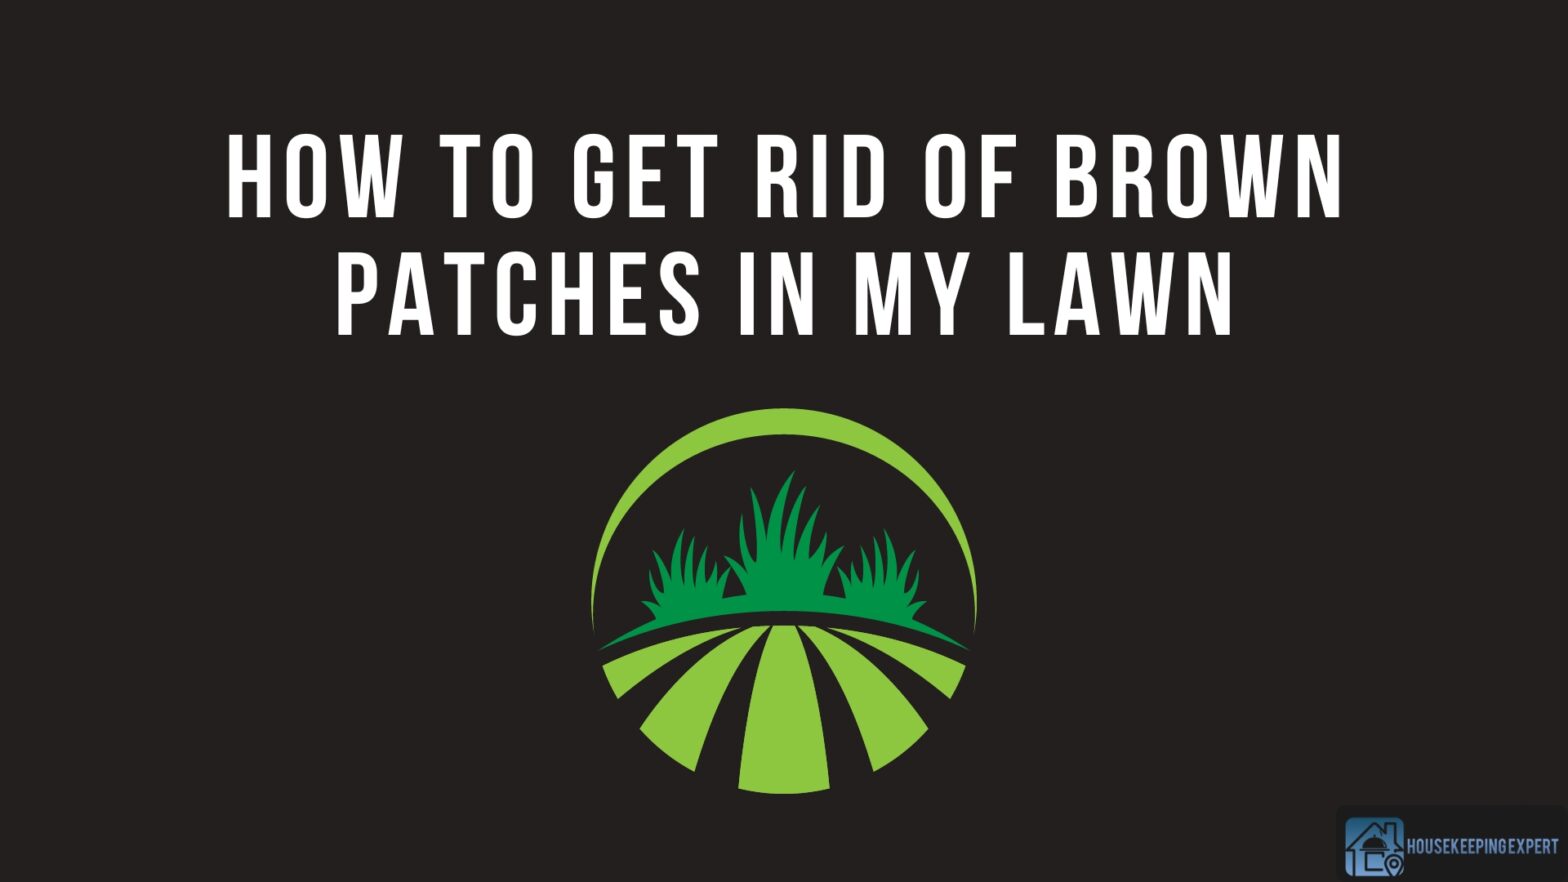 How To Get Rid Of Brown Patches In My Lawn